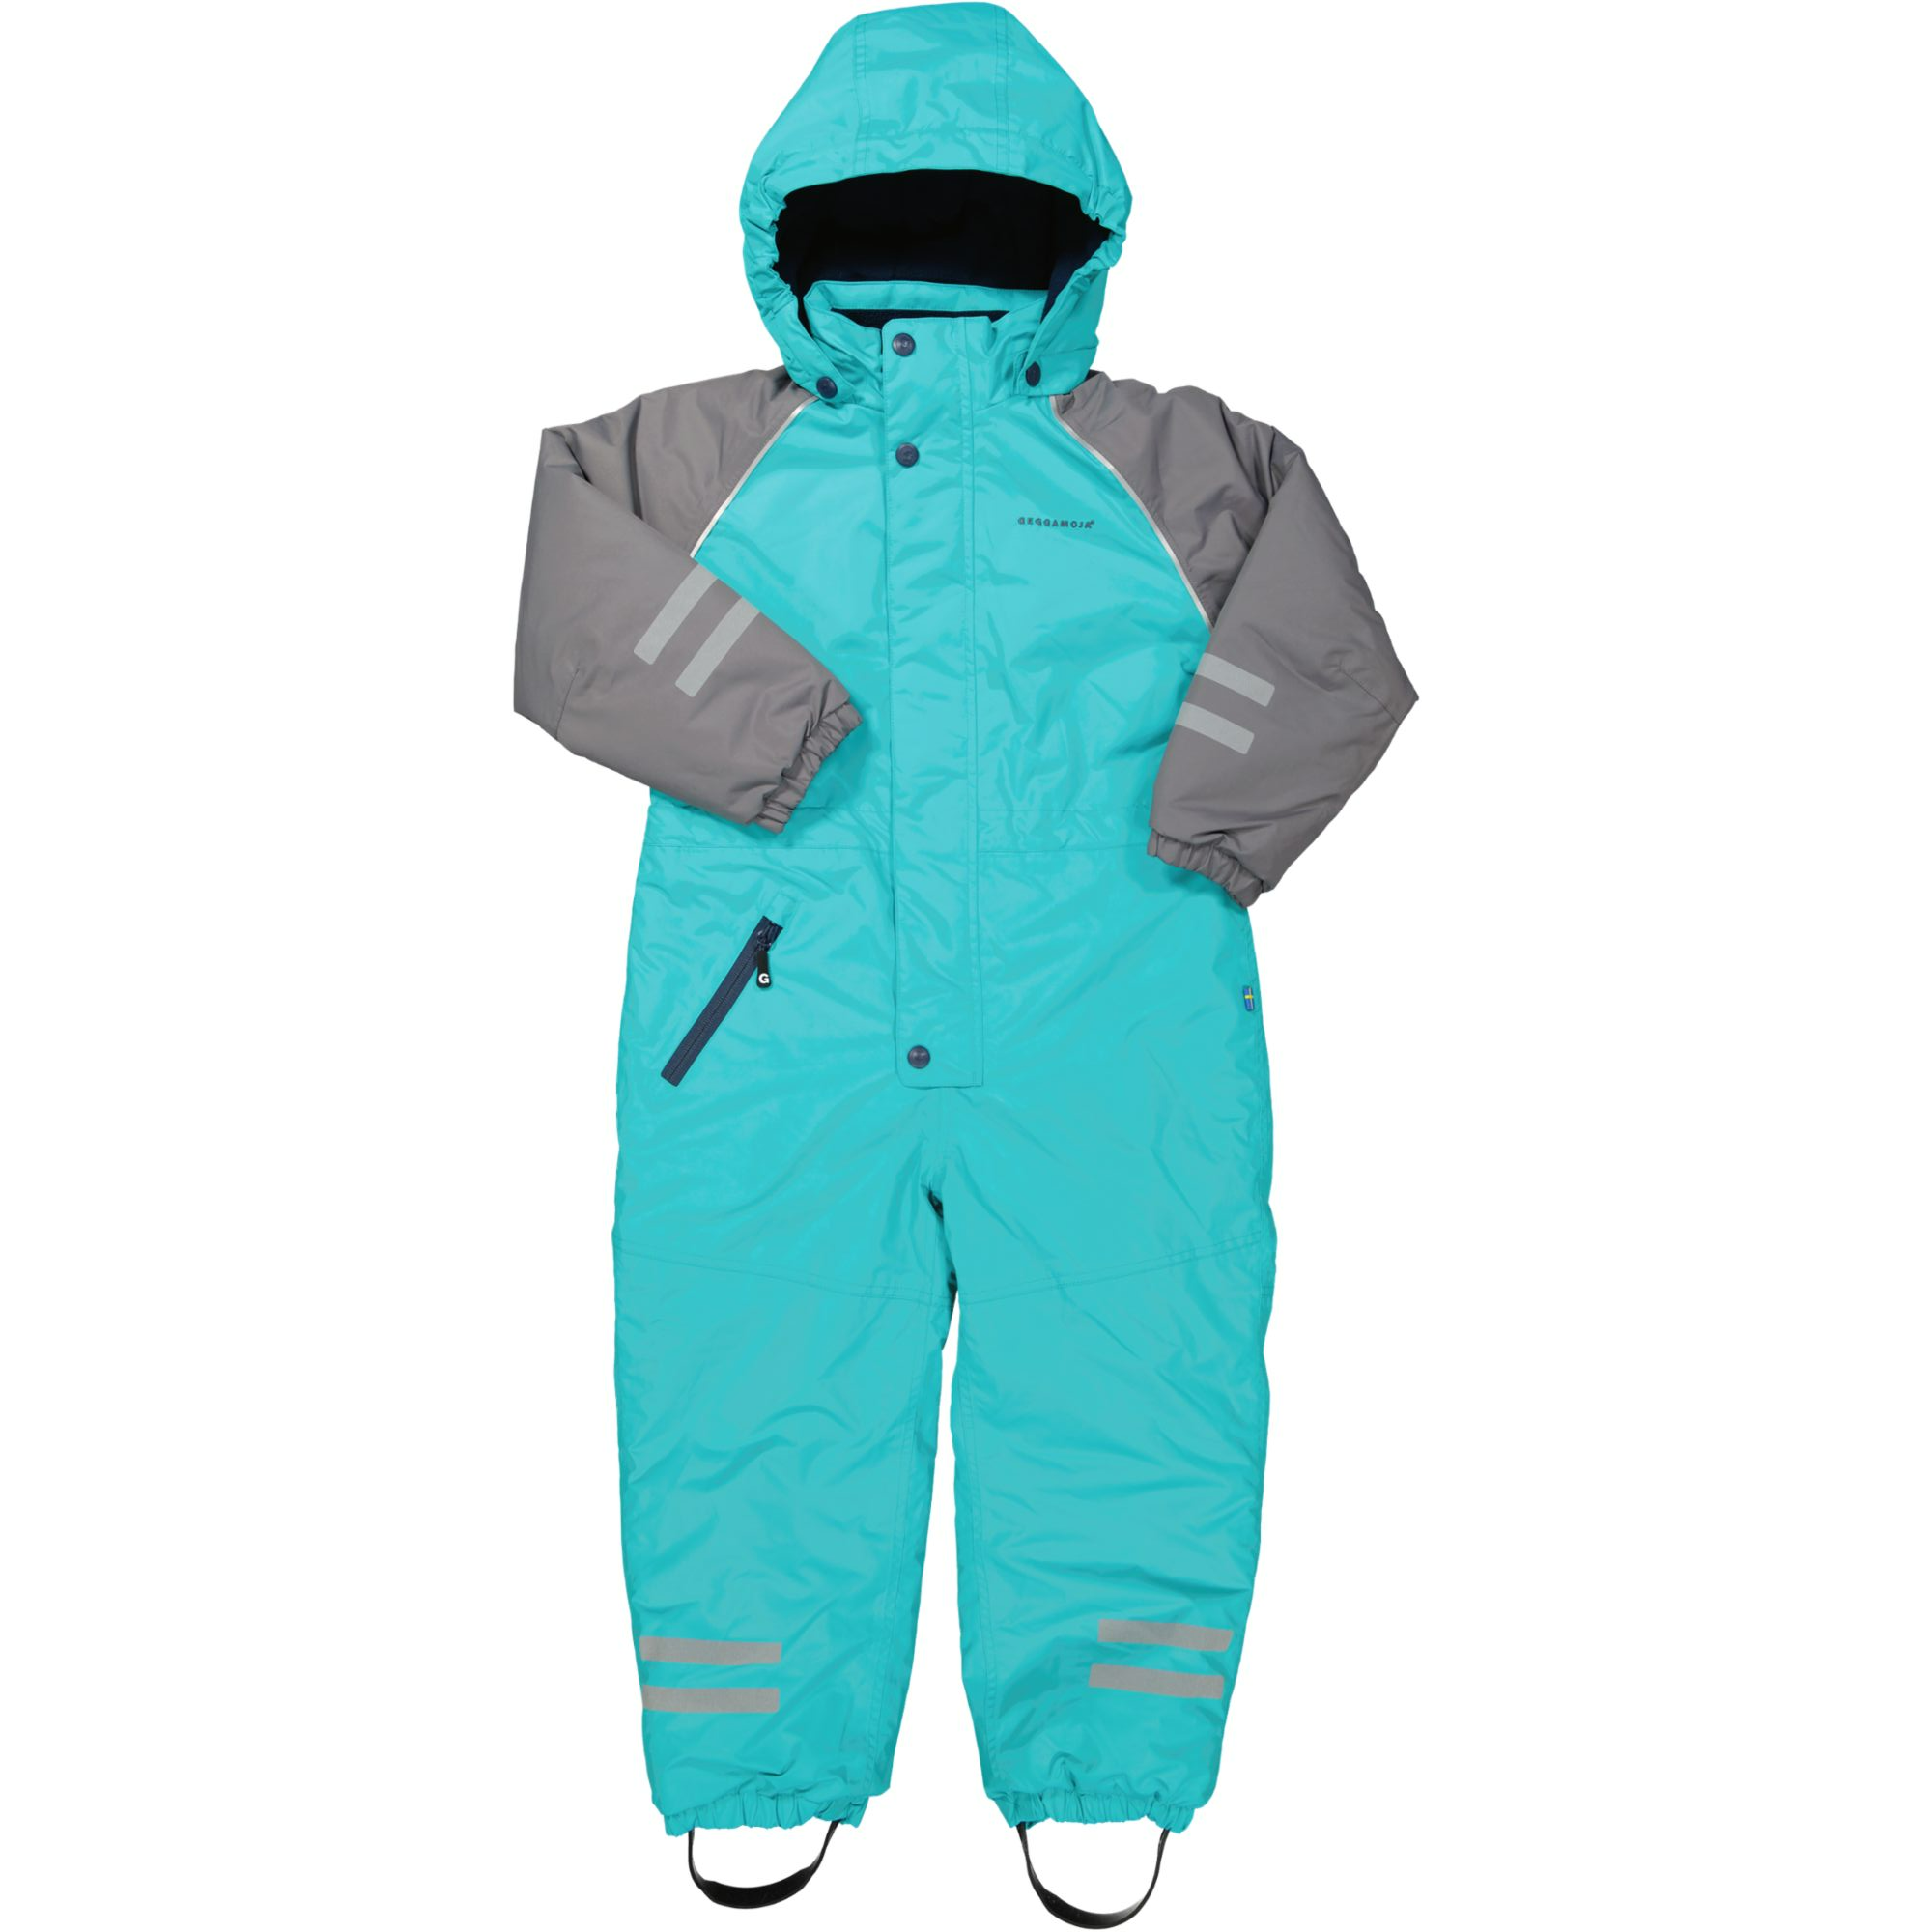 Uni Toddler Overall Turquoise